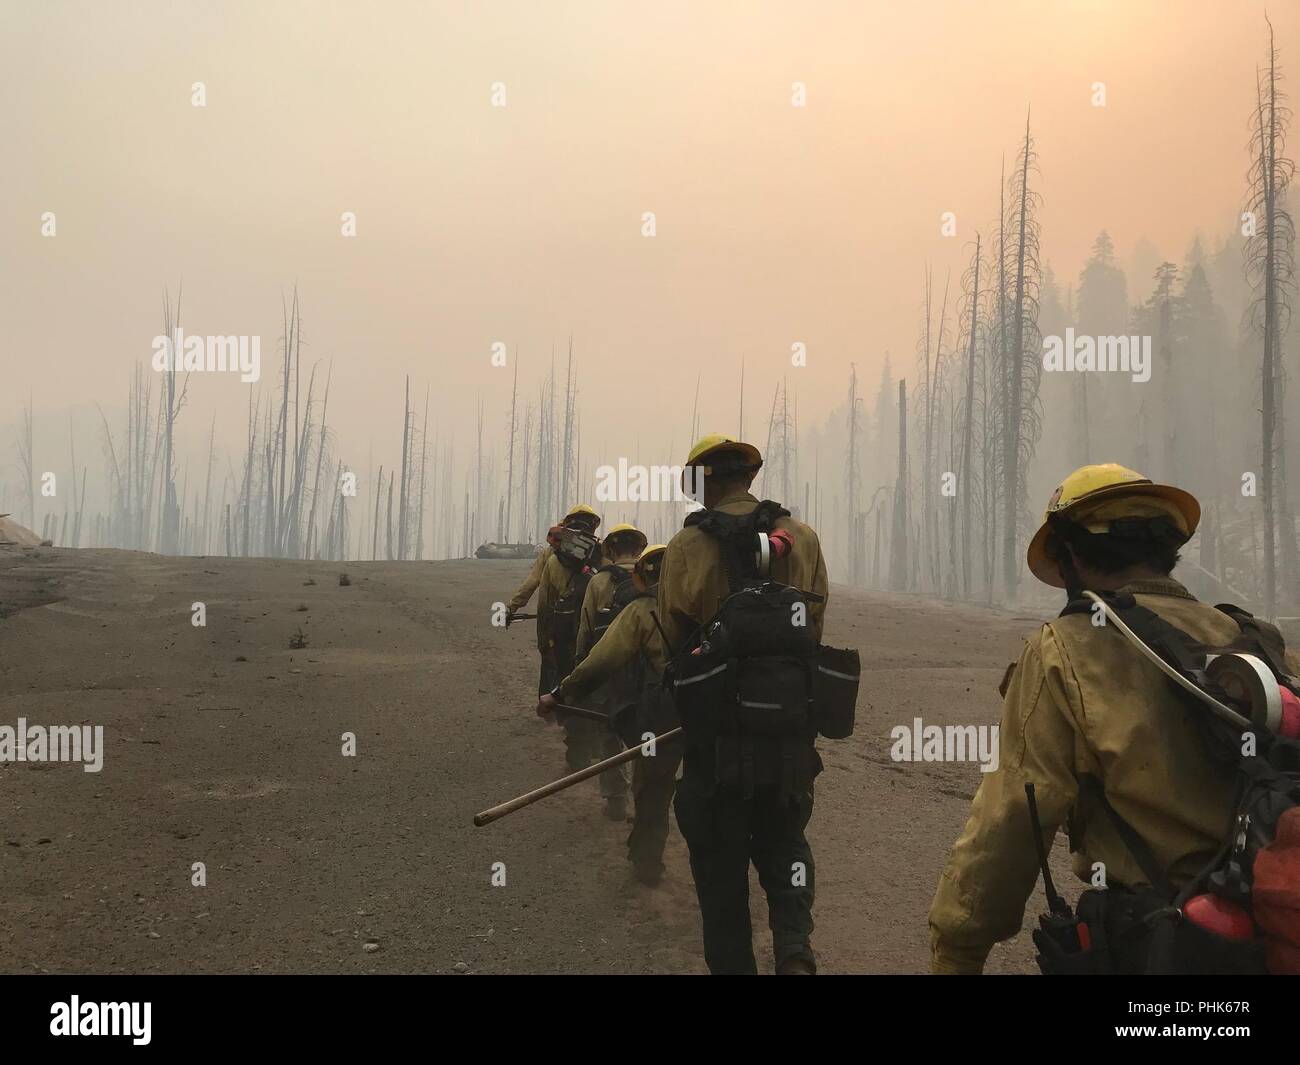 Backcountry firefighters battle the Donnell Fire in Stanislaus National Forest August 18, 2018 near Sonora, California. The wildfire burned 36,335 acres and destroyed 54 major structures across Northern California. Stock Photo